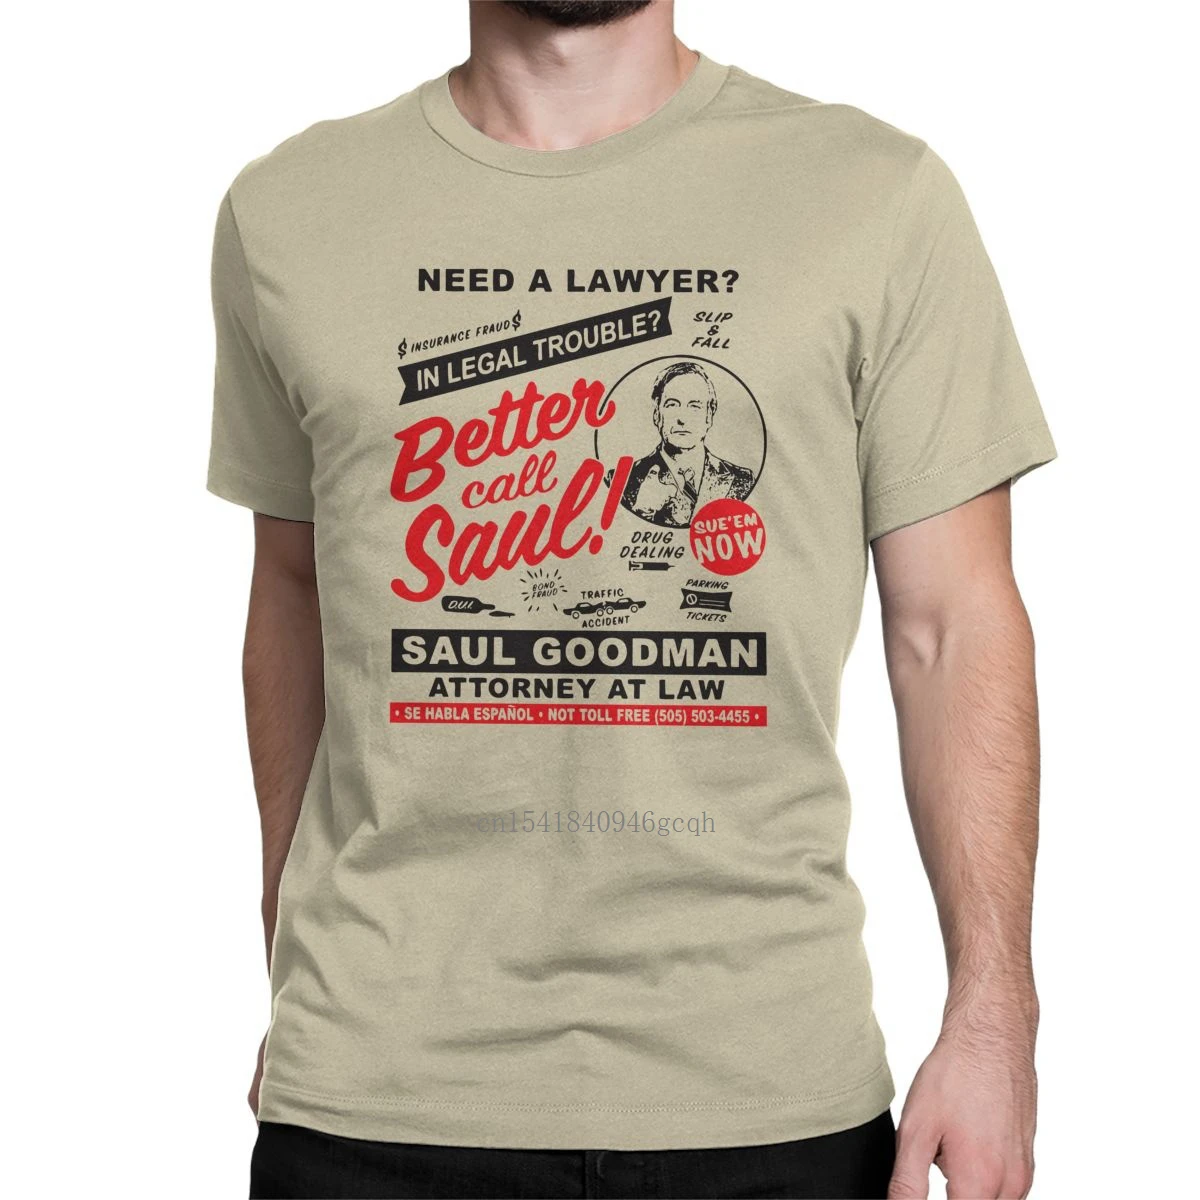 

Need A Lawyer Better Call Saul T Shirt Men's Cotton Hipster T-Shirts Attorney Funny Lawyer Tee Shirt Short Sleeve Tops Adult